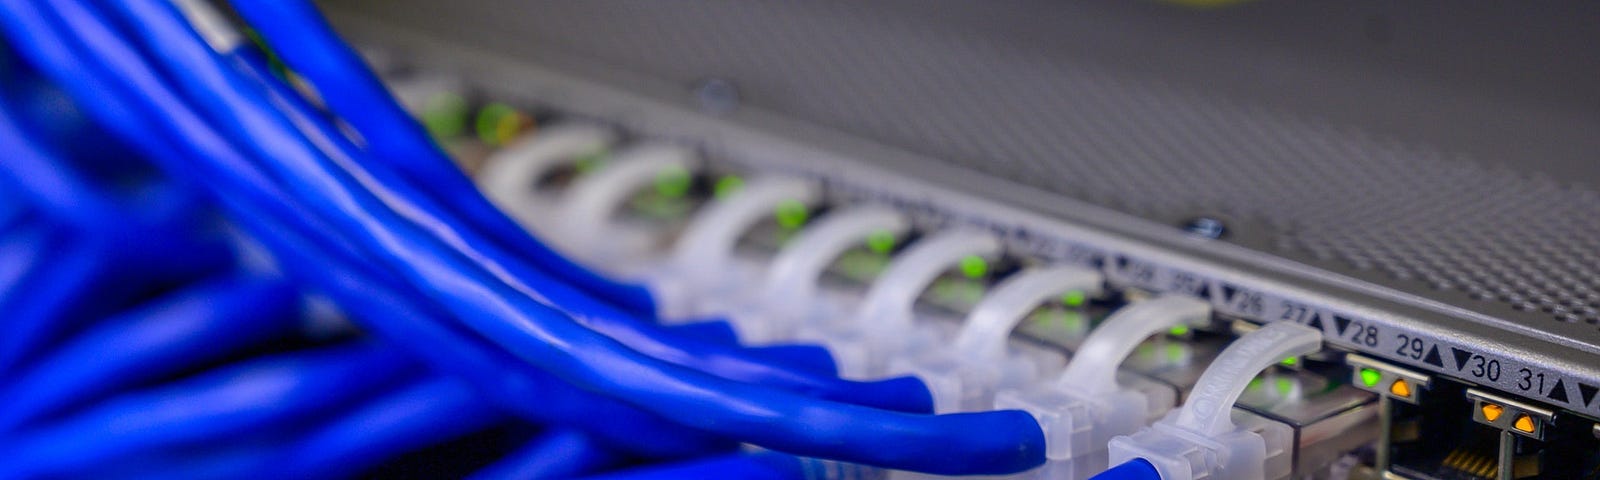 Cables Connected to Ethernet Ports